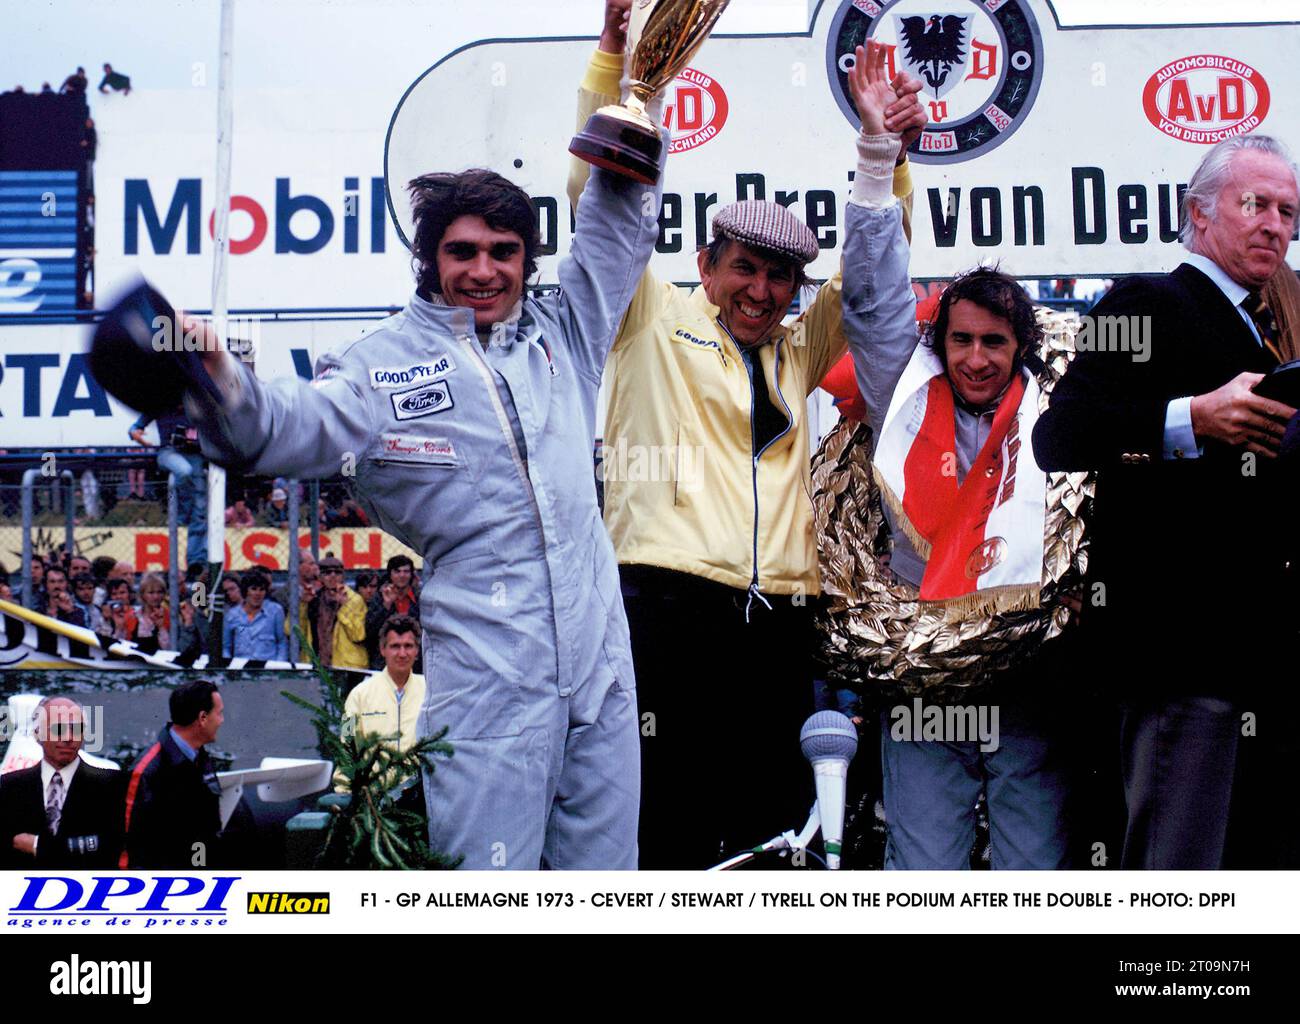 AUTO - F1 1973 - GERMANY - FRANCOIS CEVERT / JACKIE STEWART / TYRRELL ON THE PODIUM AFTER THE DOUBLE - PHOTO: DPPI KEN TYRRELL AMBIANCE PORTRAIT Stock Photo